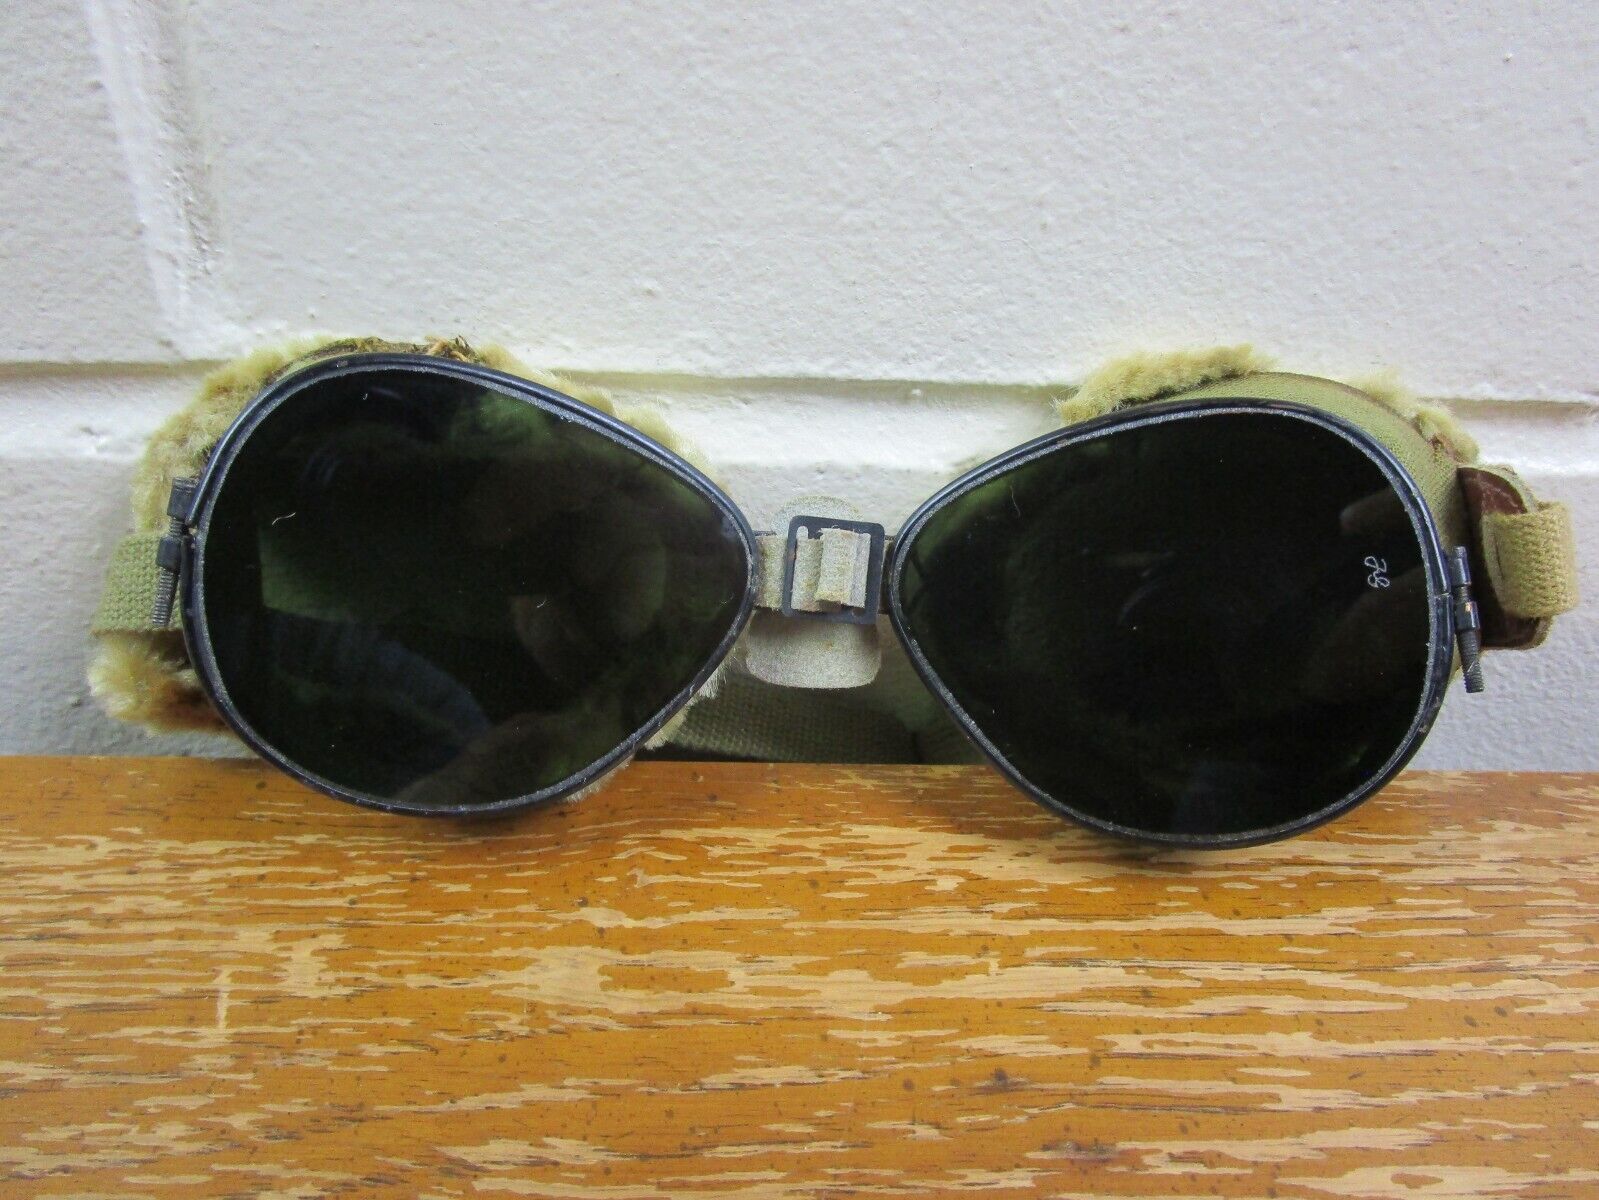 Vintage 1940's Aviator Pilot Goggles Military Steampunk Motorcycle Fur Lined